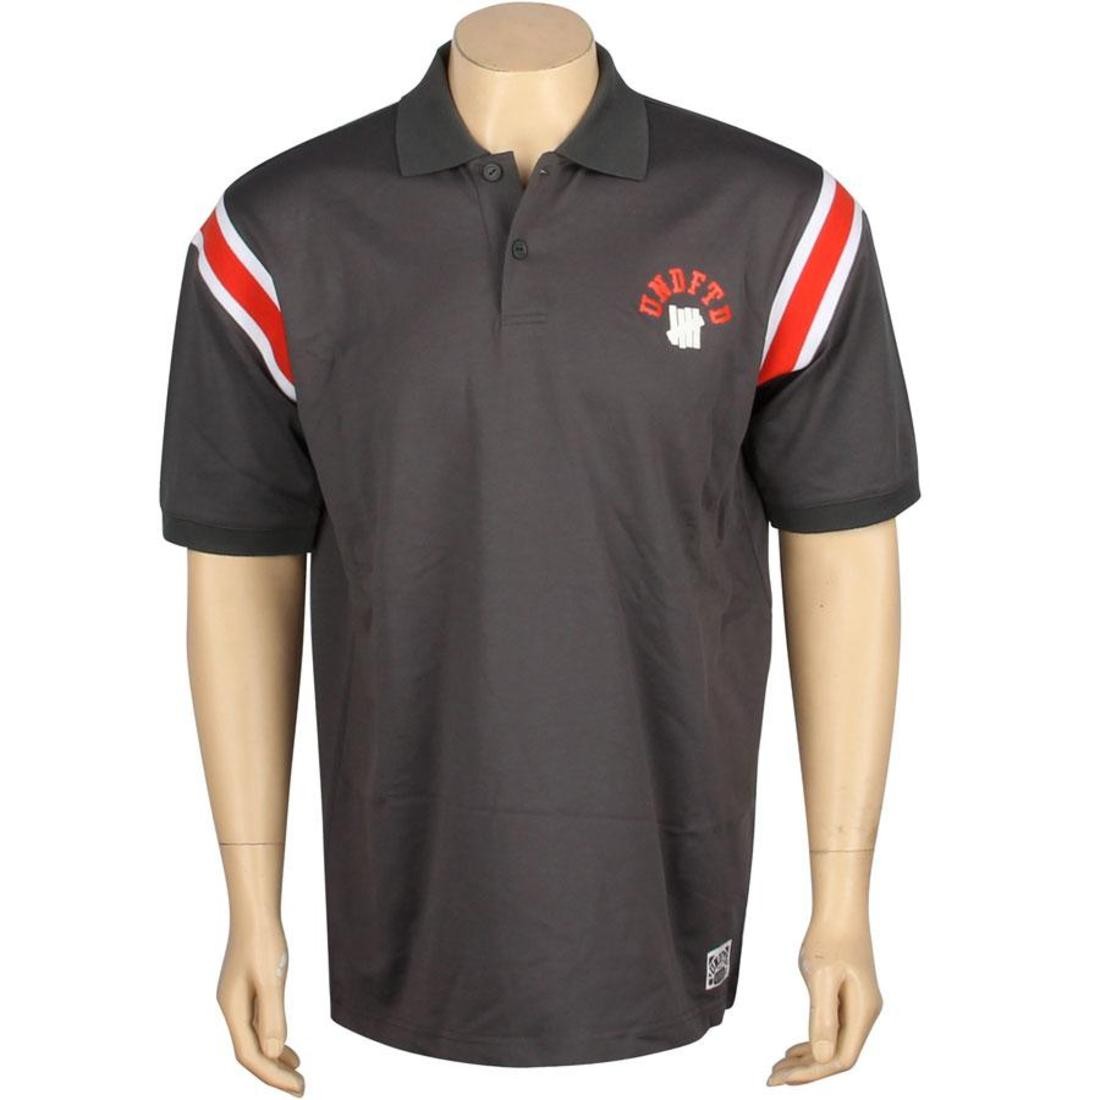 Undefeated Rise Polo (charcoal grey)